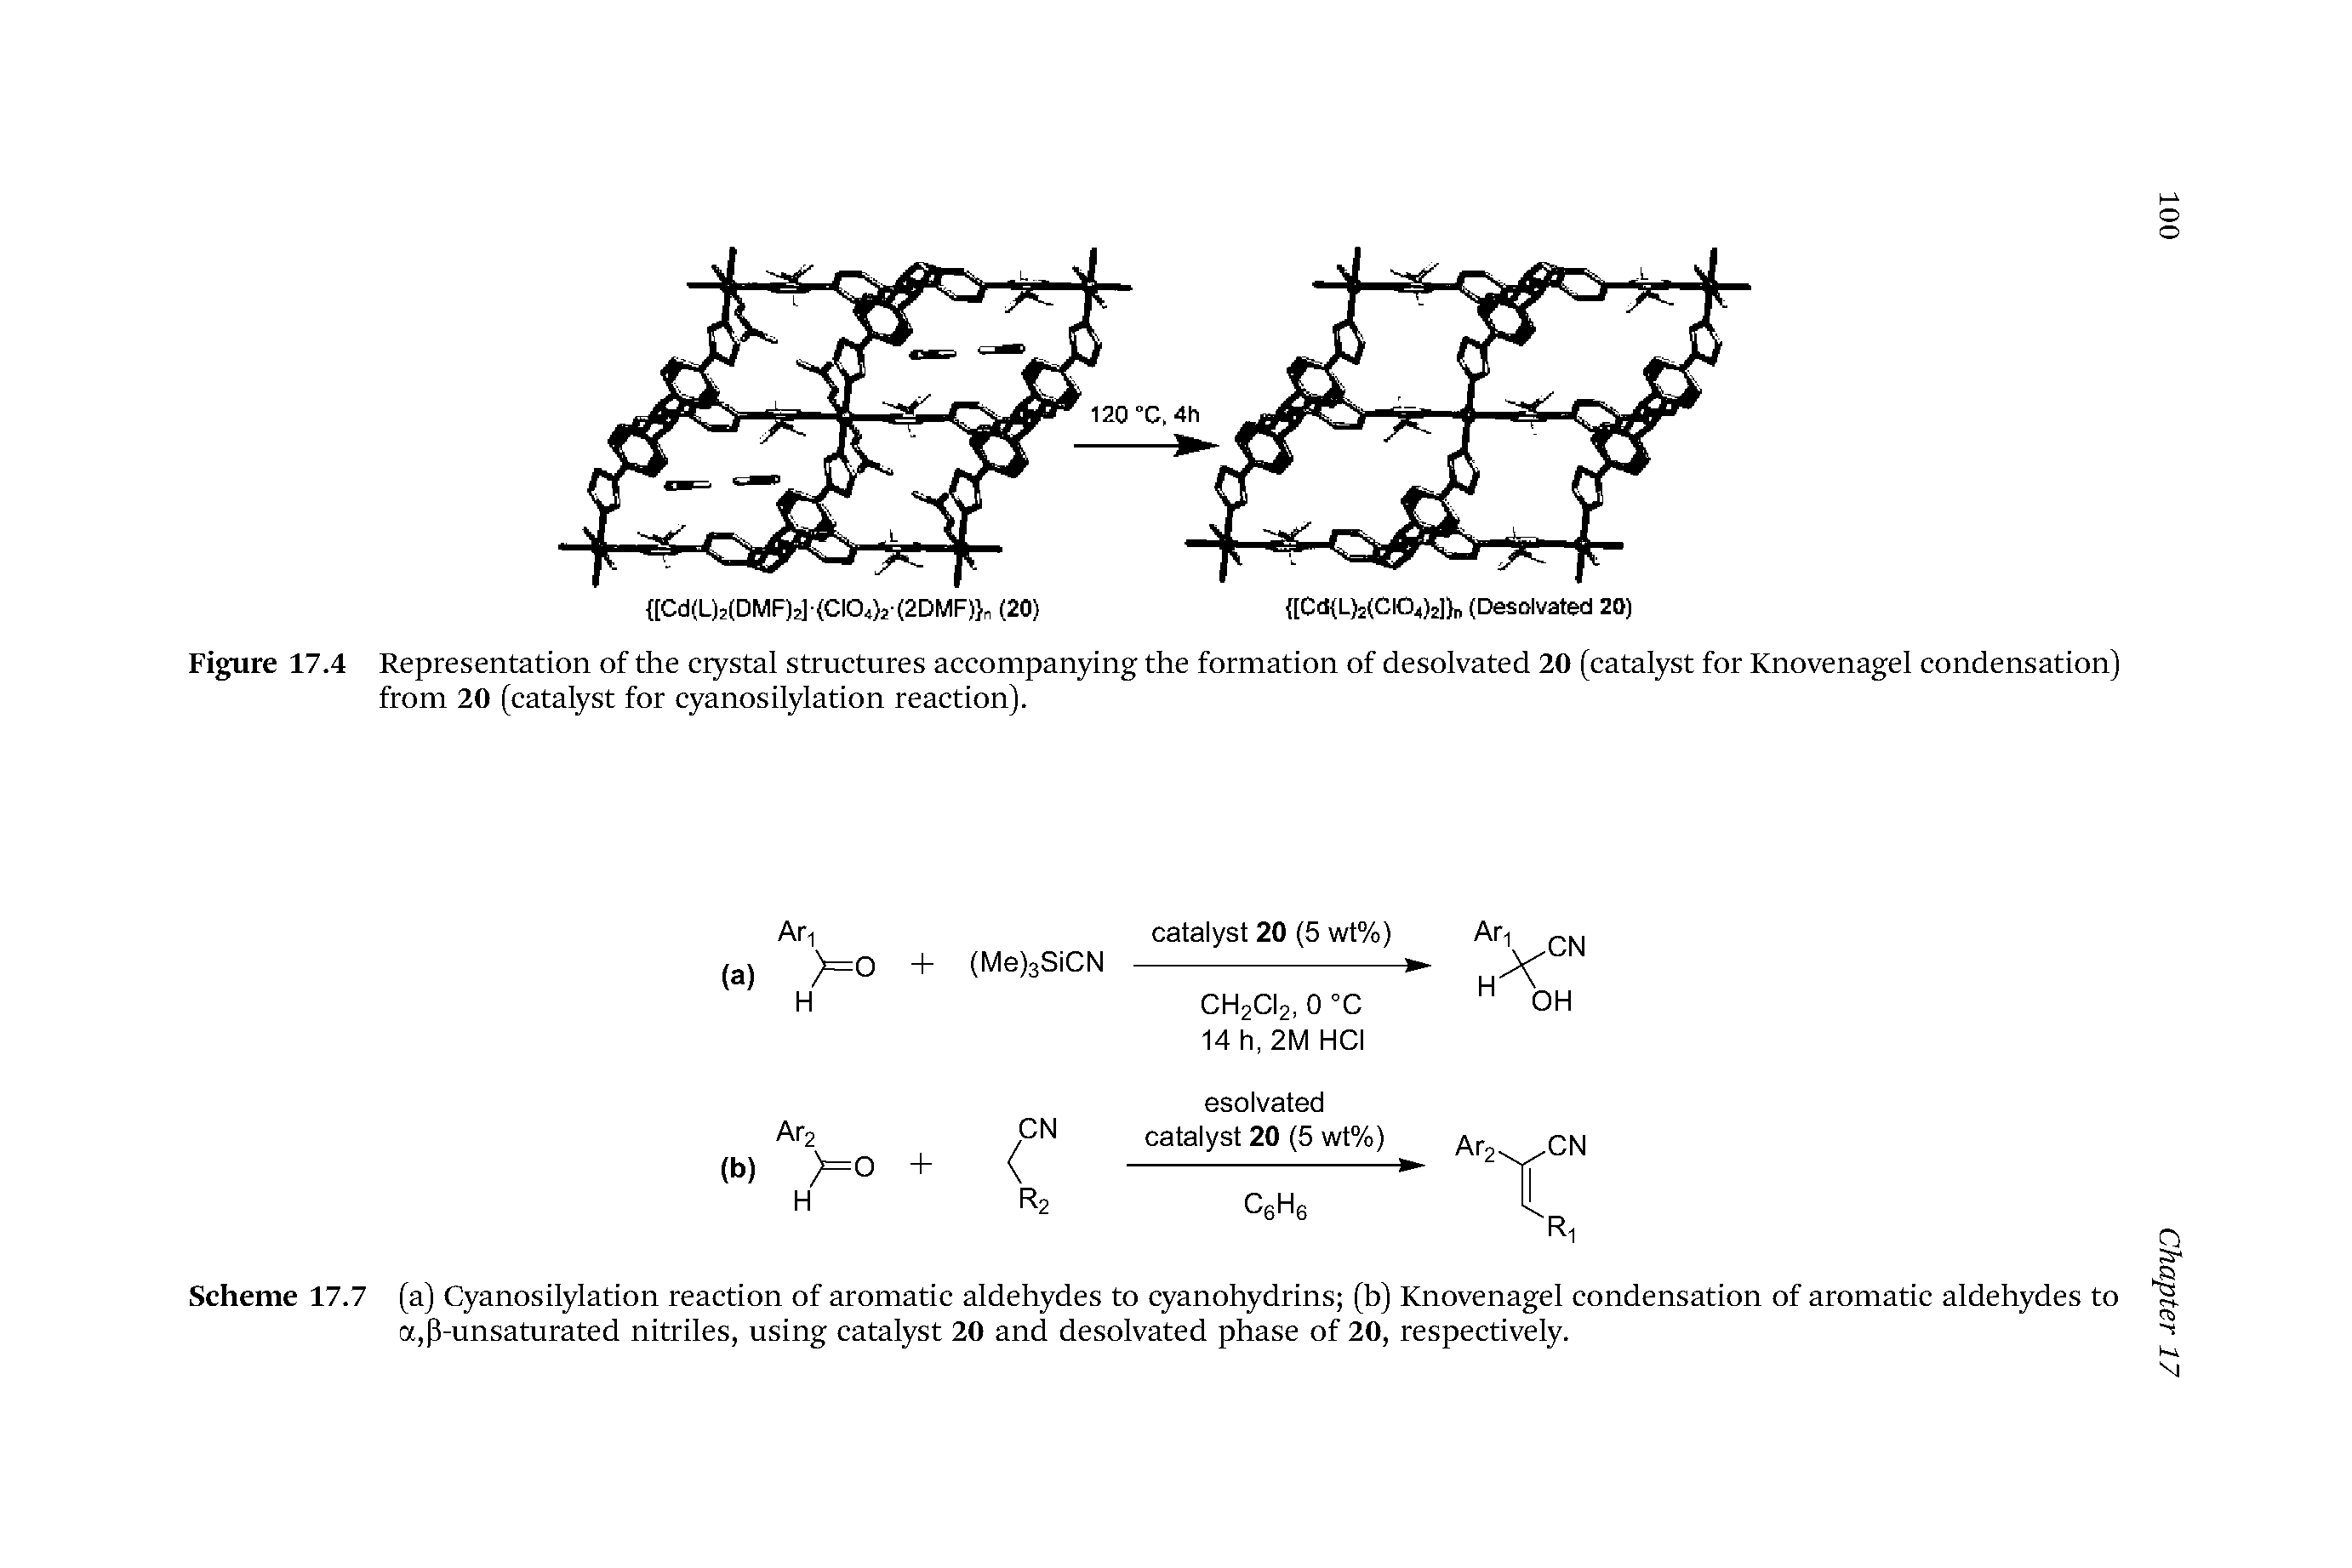 Figure 17.4 Representation of the crystal structures accompanying the formation of desolvated 20 (catalyst for Knovenagel condensation) from 20 (catalyst for cyanosilylation reaction).